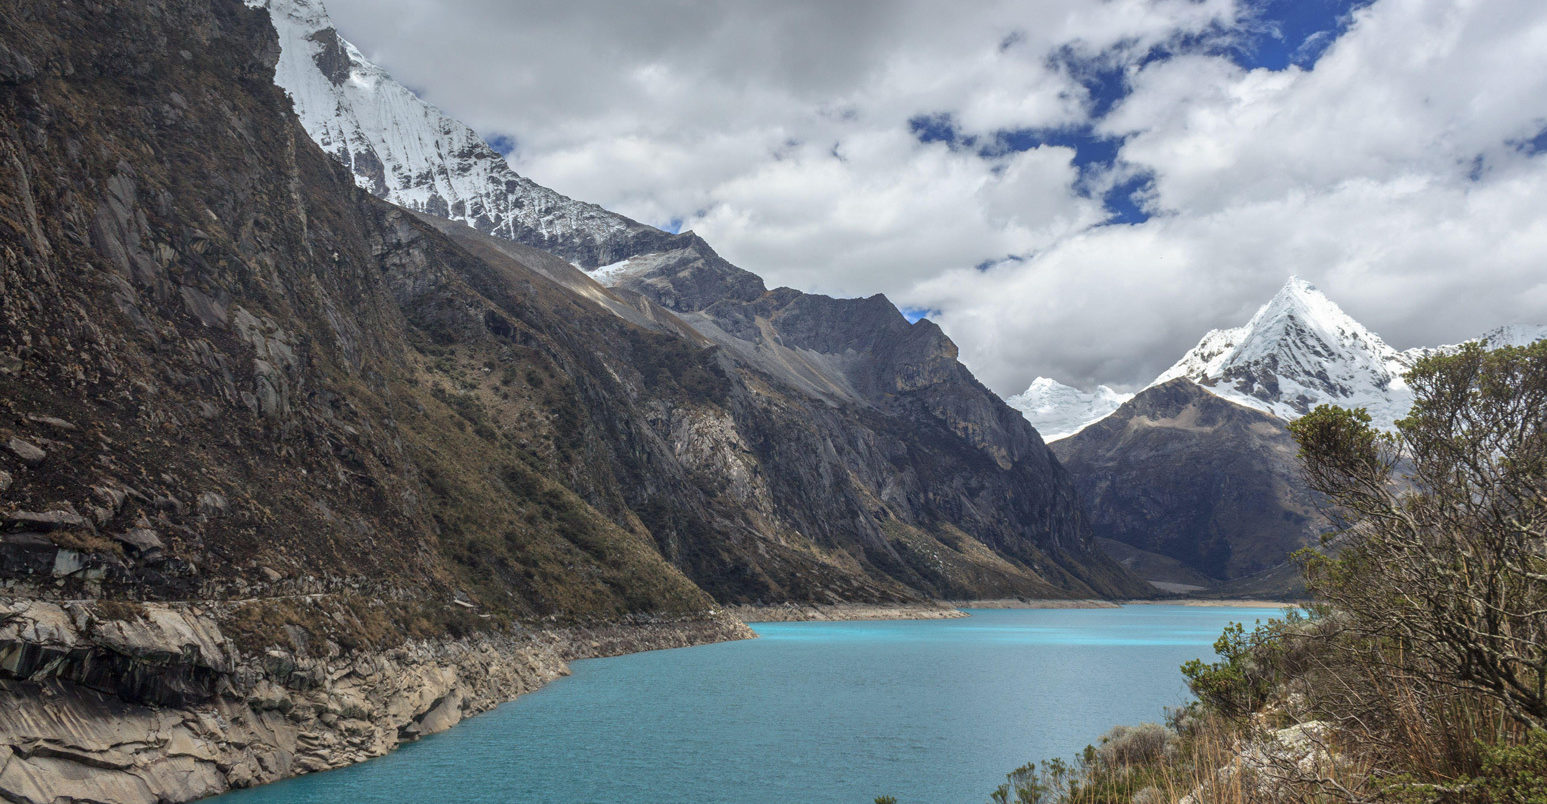 Turquoise lake in the andes mountains in peru